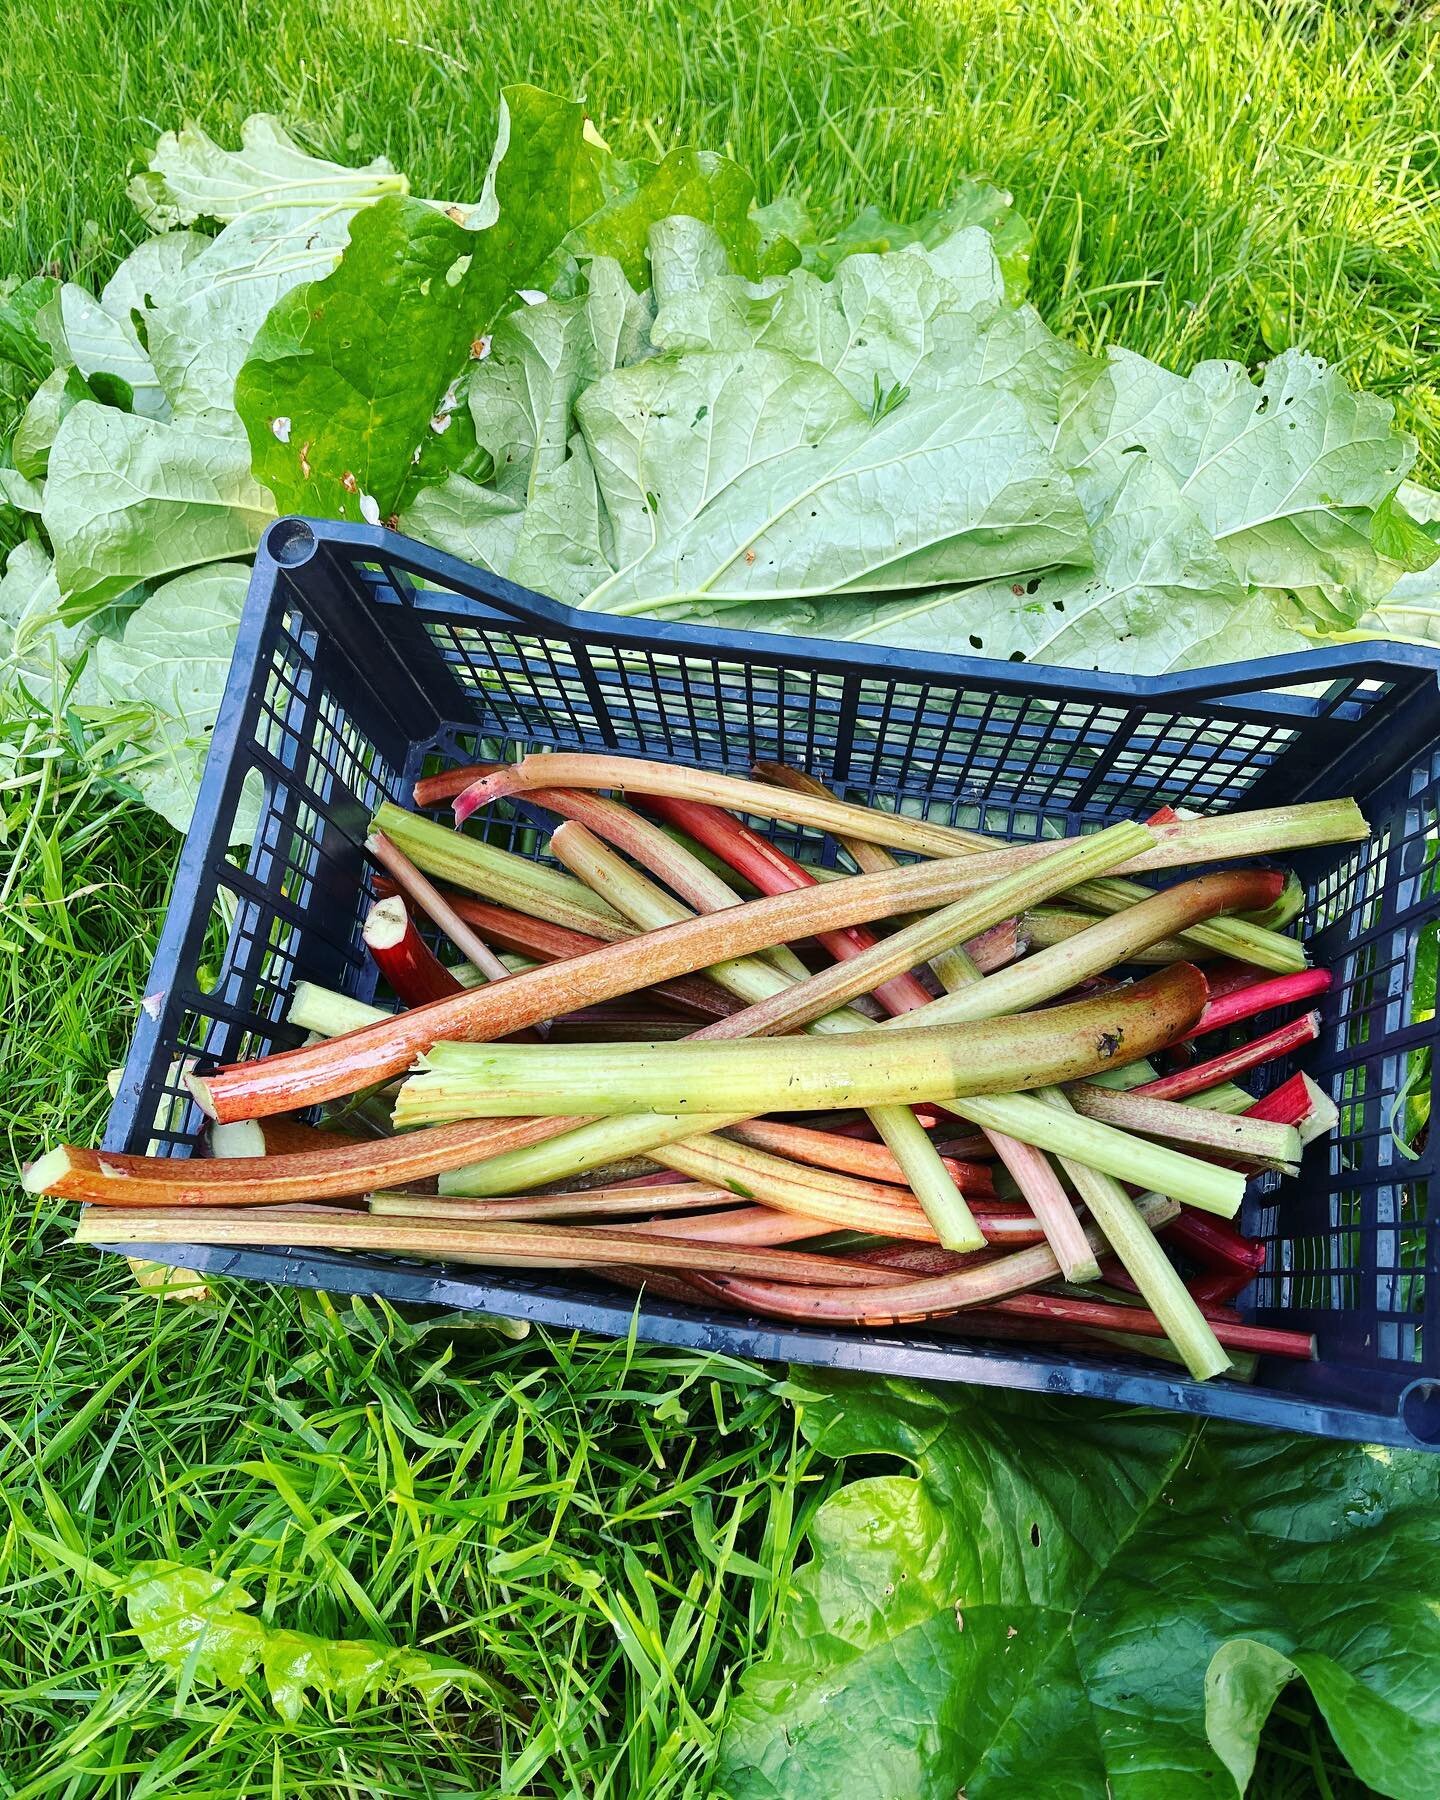 Freshly picked rhubarb heading to this week&rsquo;s veg boxes! 

#rhubarb #veg #endfoodwaste